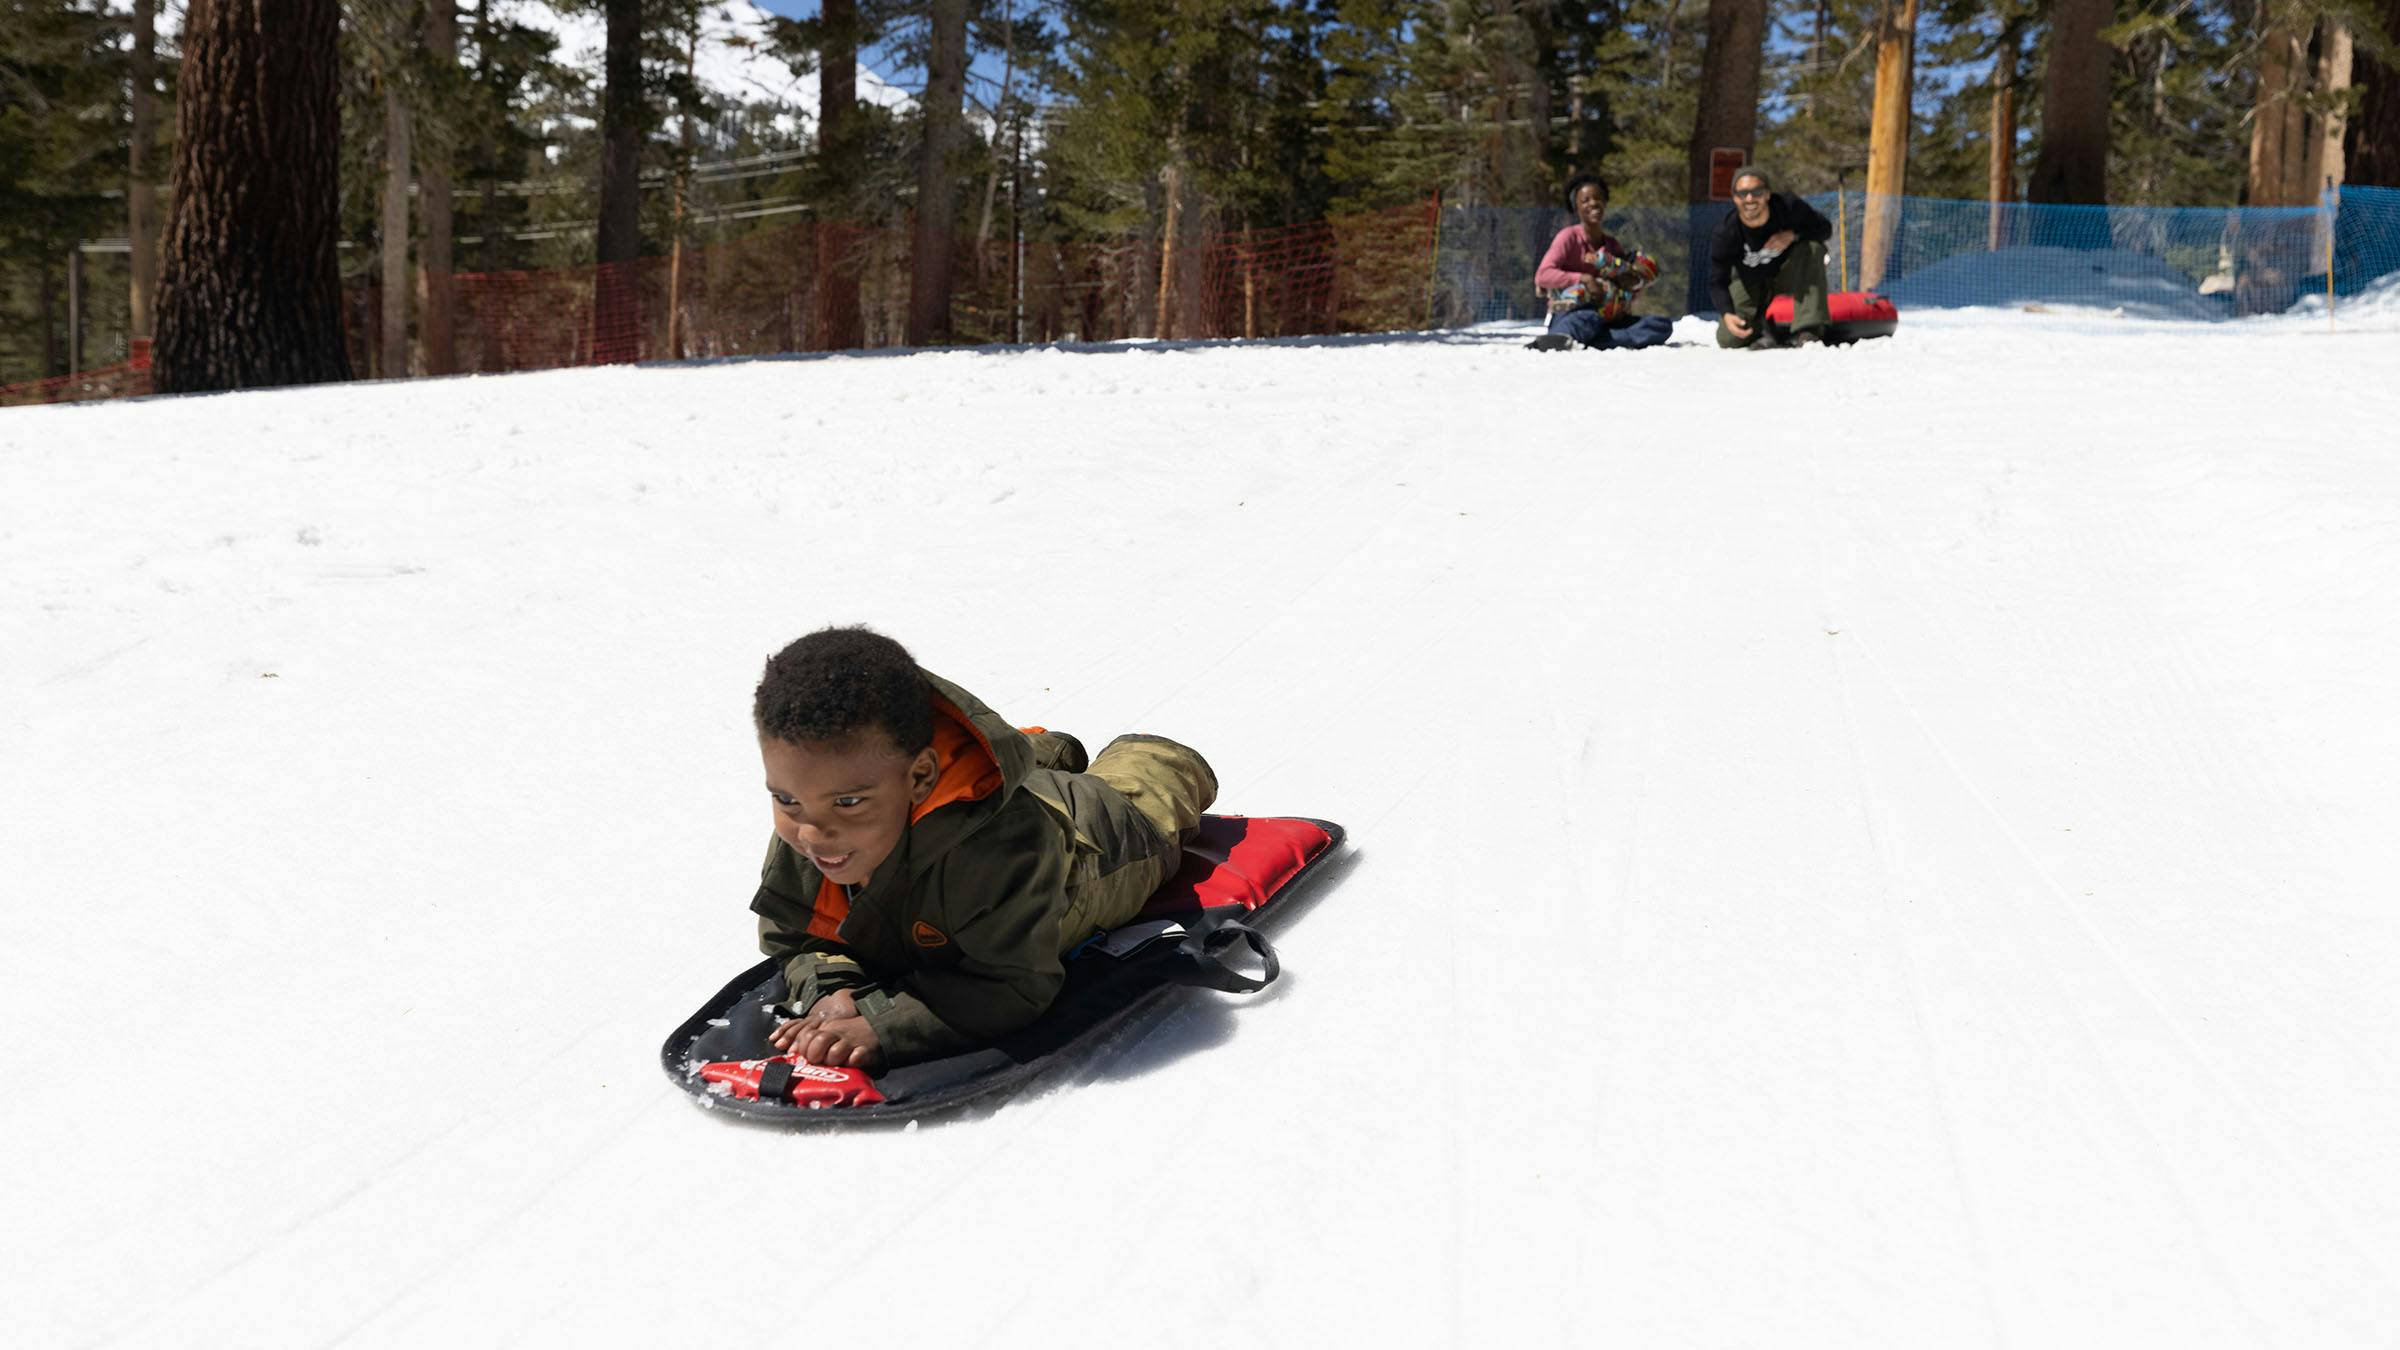 Child sliding on sled in snow play area